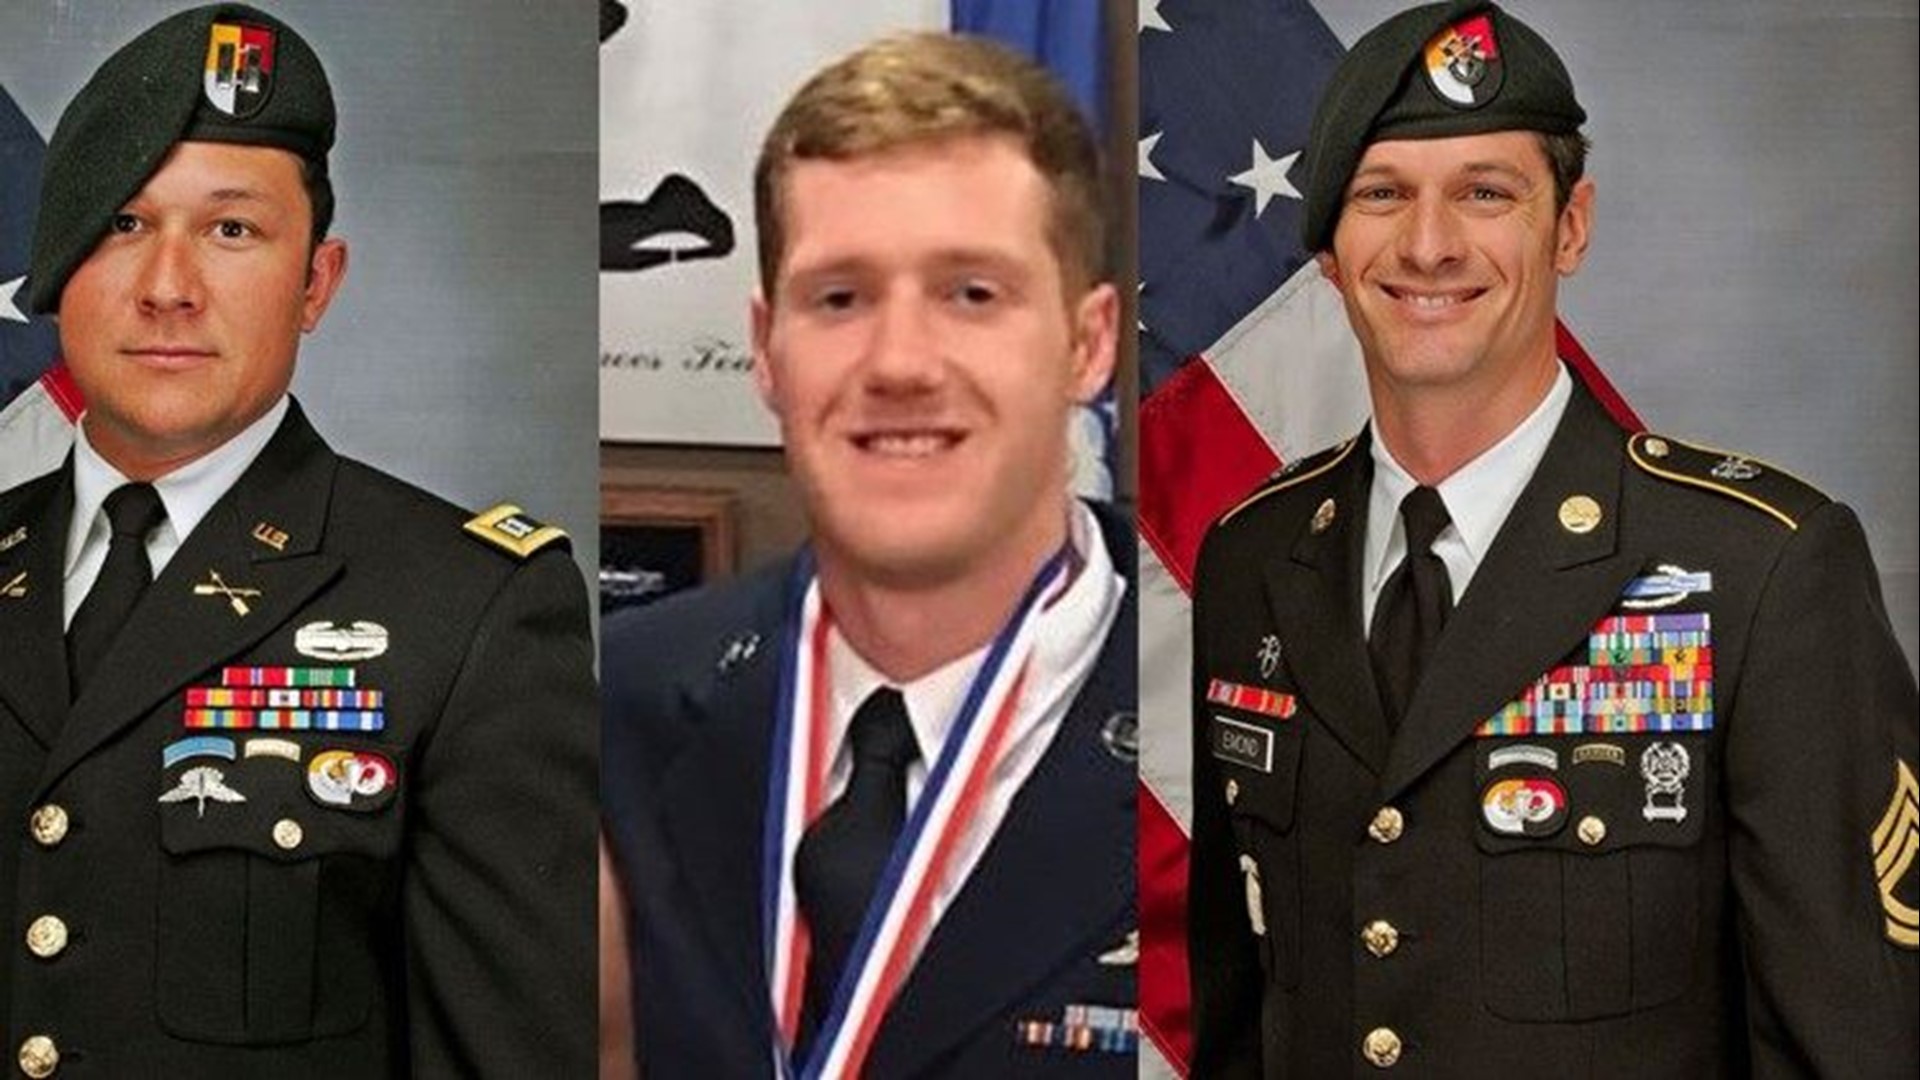 2 Fort Bragg Soldiers Among 3 Killed In IED Attack In Afghanistan